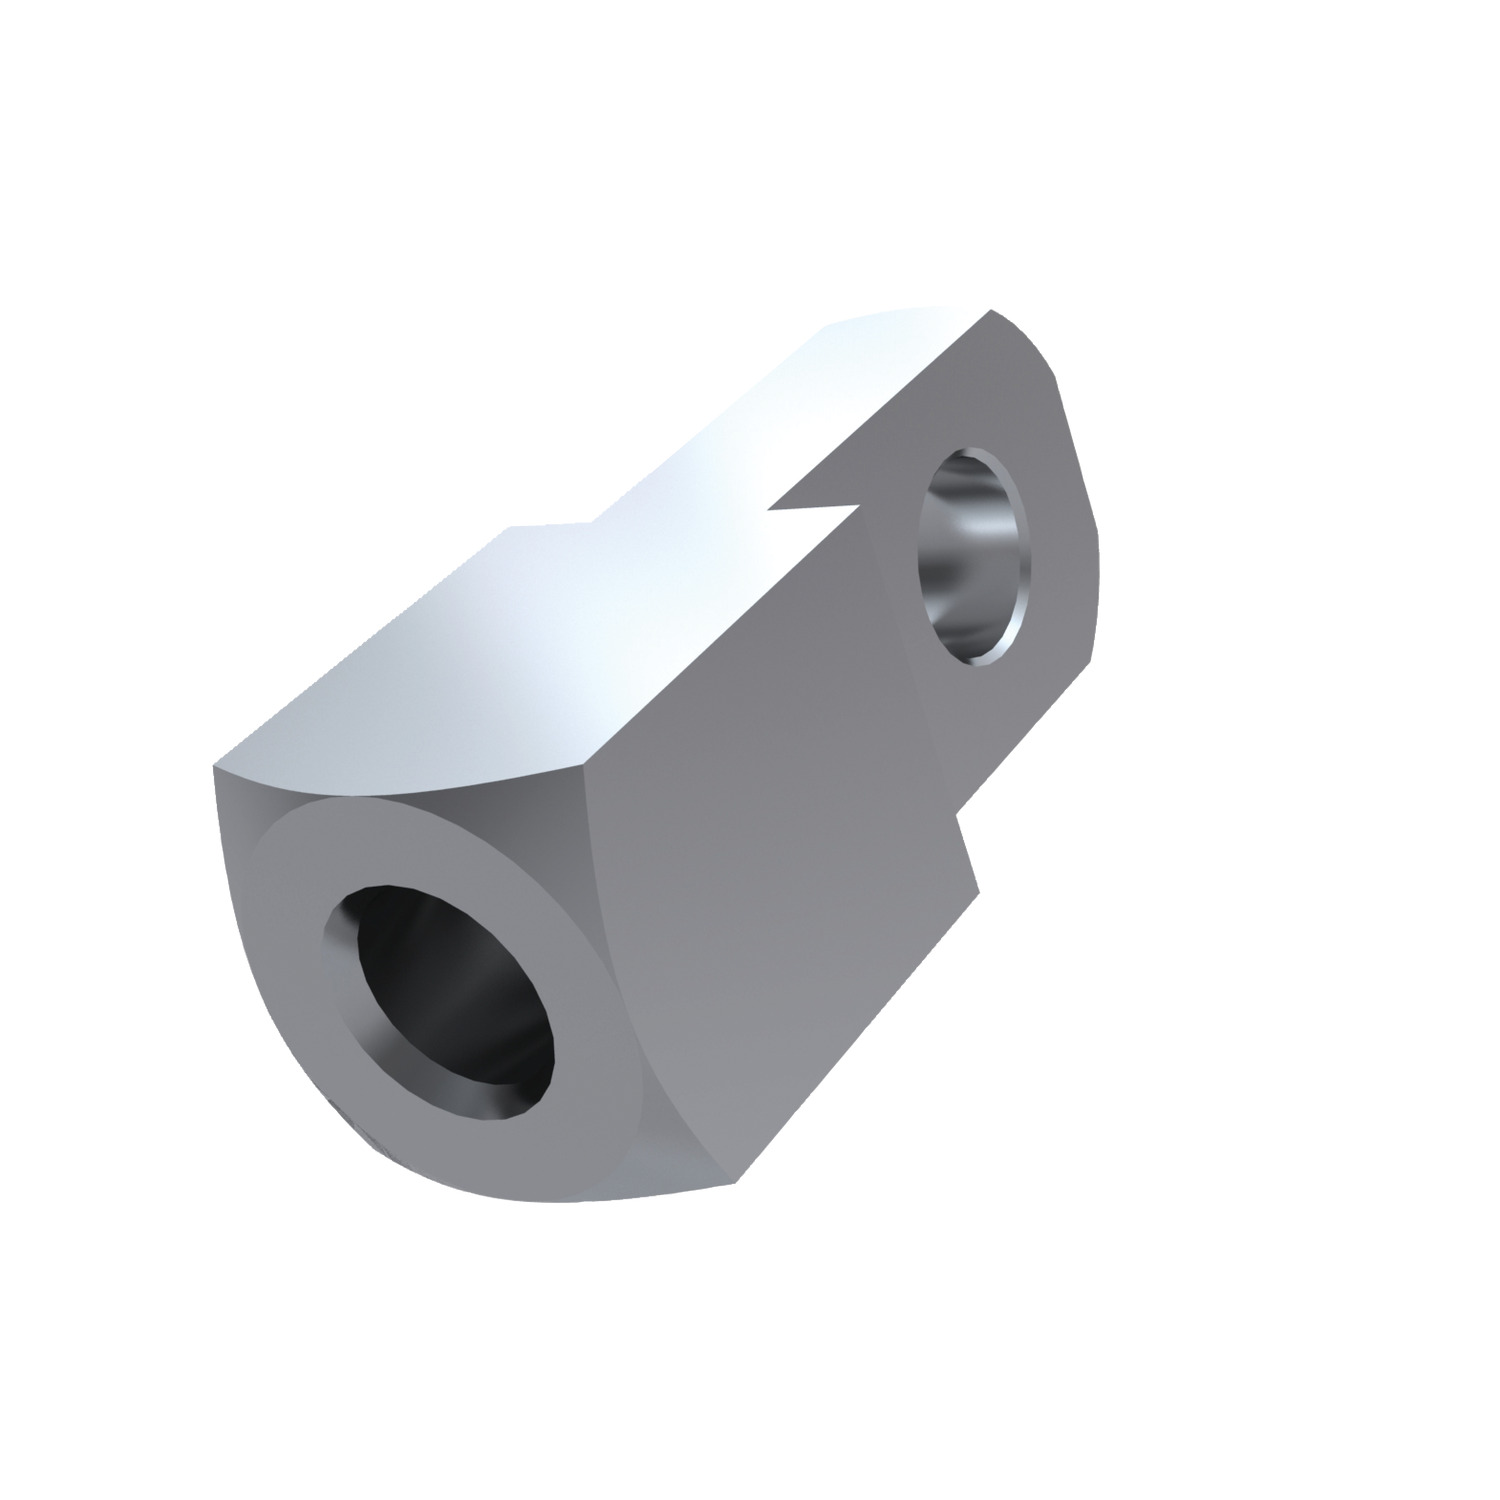 R3421 Mating Piece for Clevis Joints